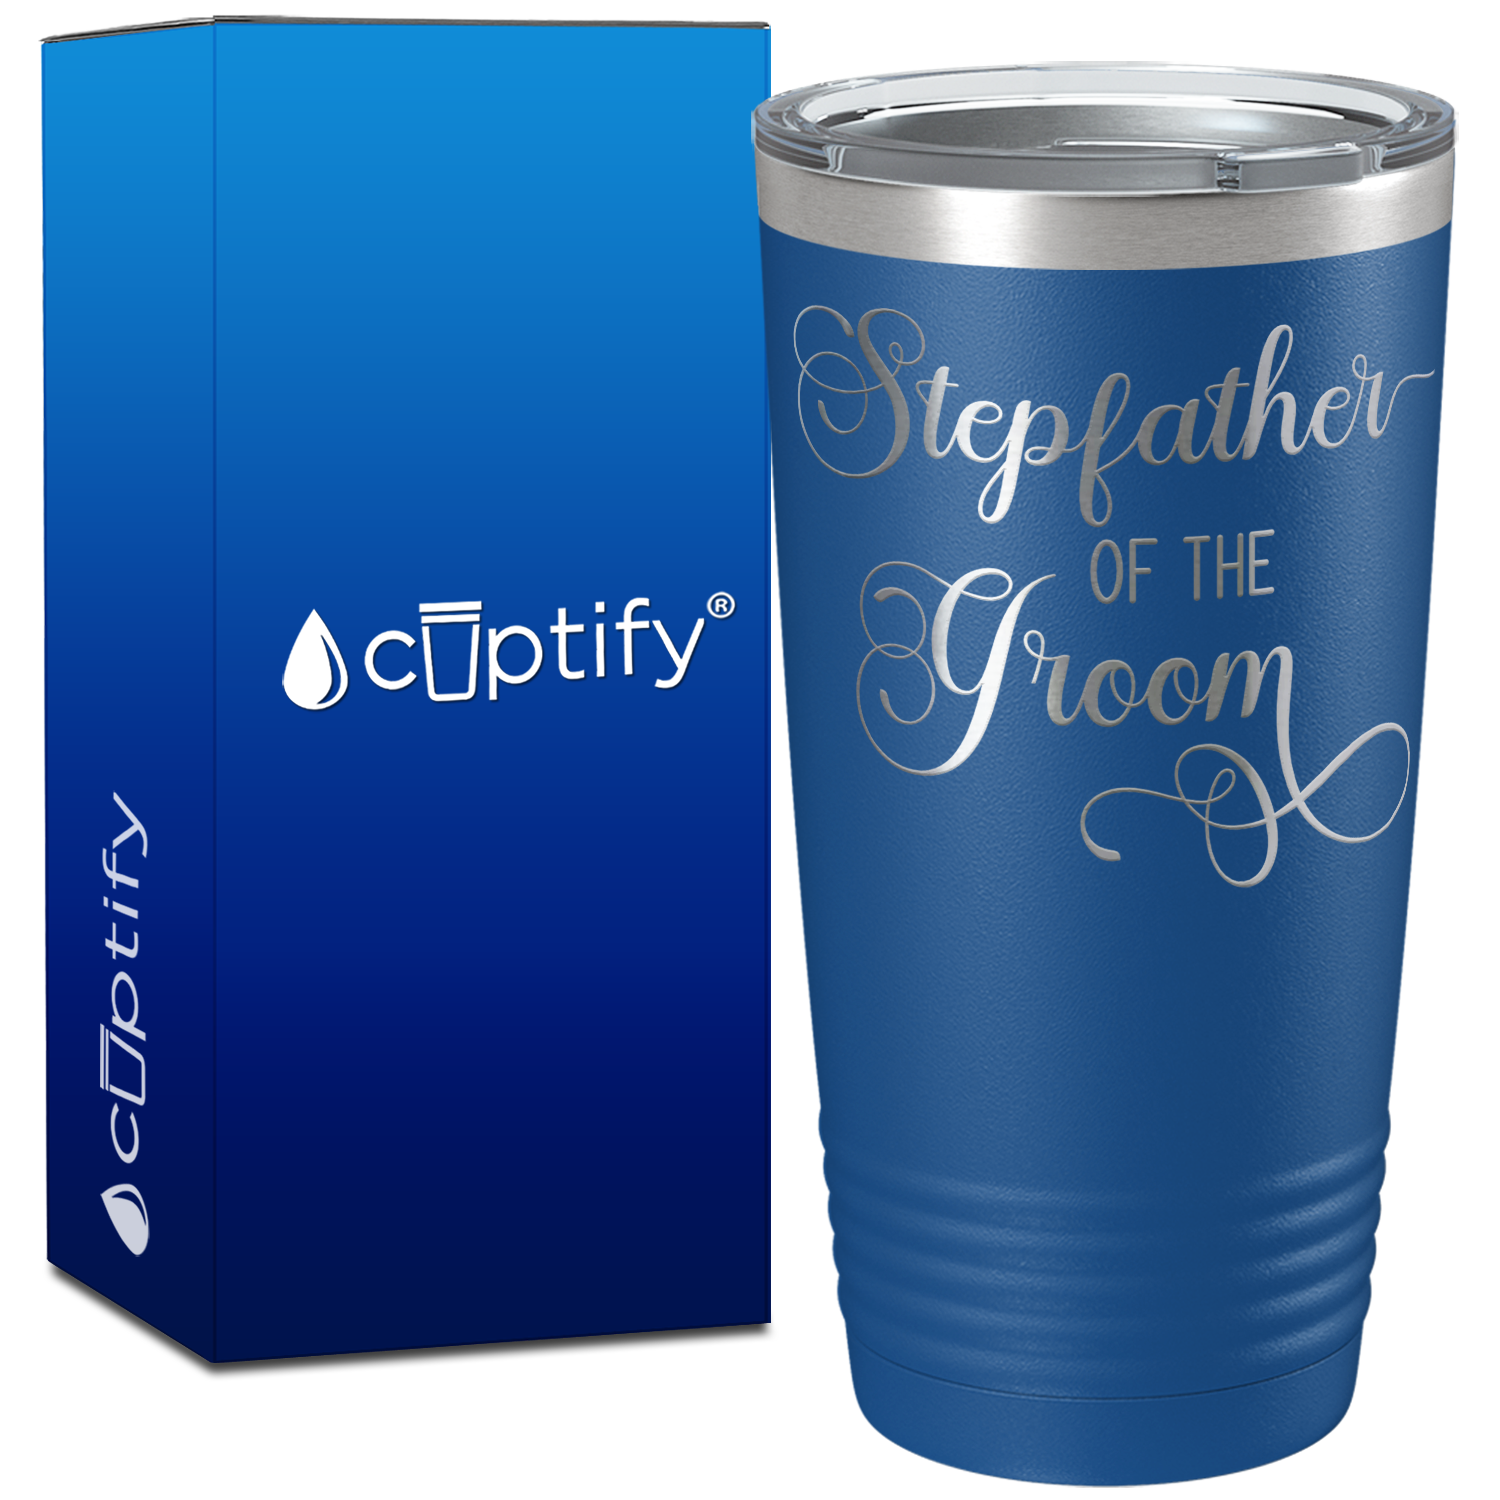 Stepfather of the Groom on 20oz Tumbler